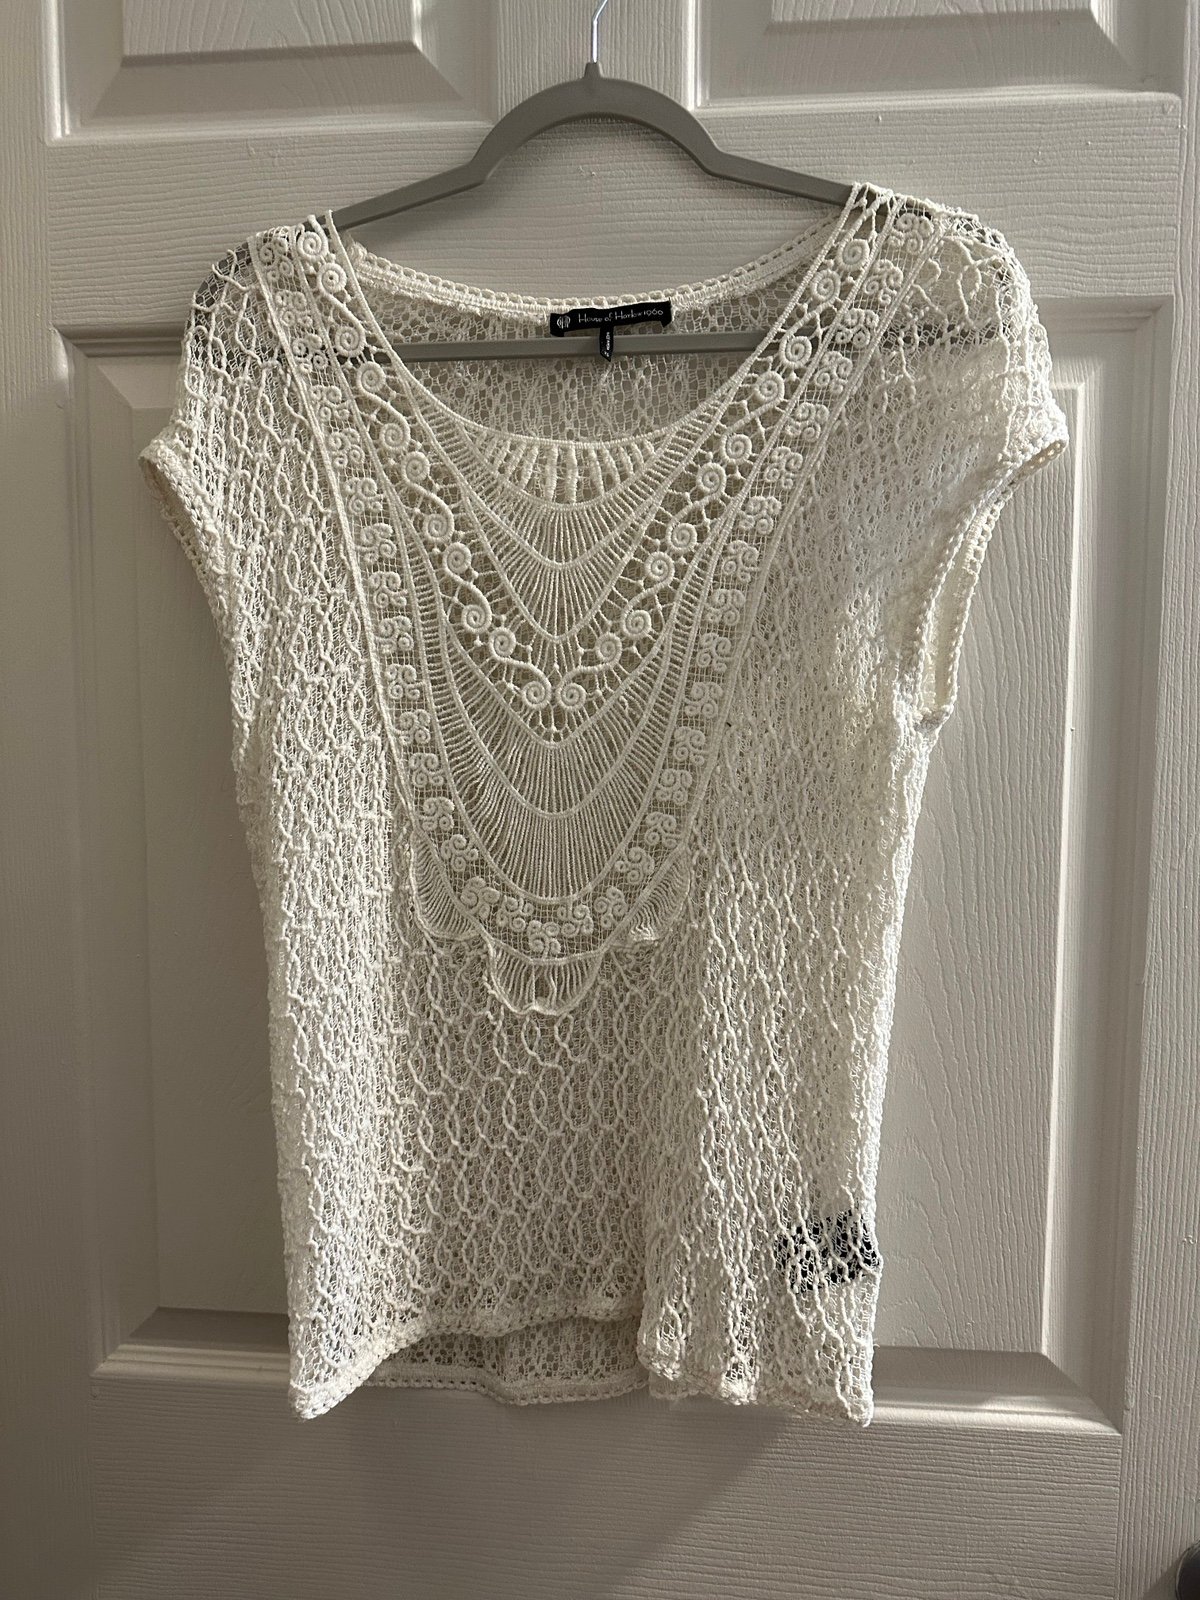 Custom House of harlow 1960 knit top FUYqJLpTj Everyday Low Prices